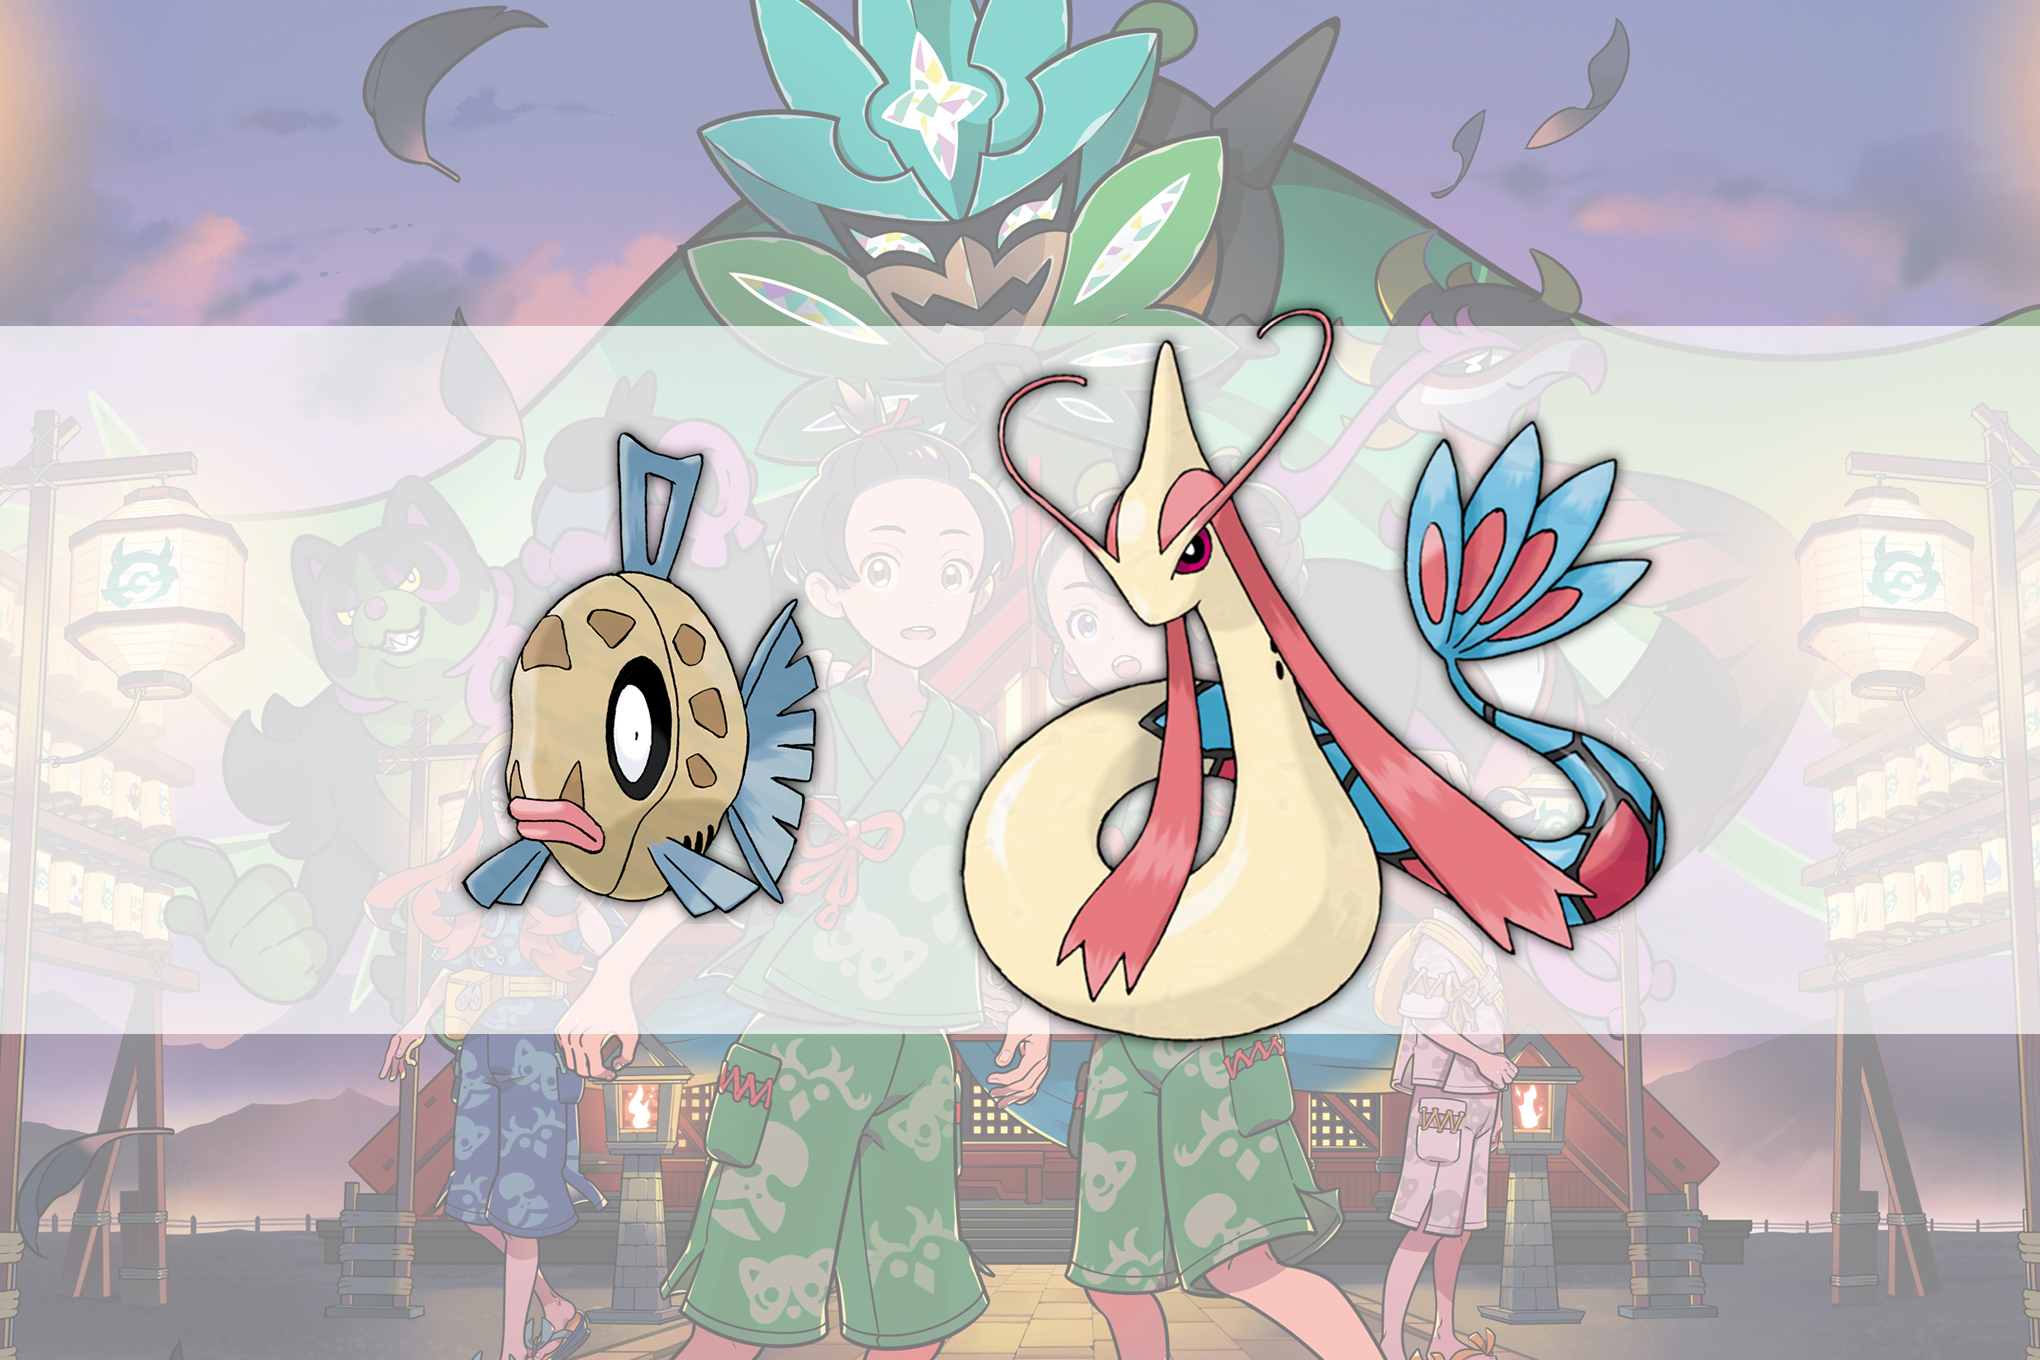 Feebas and Milotic from Pokémon overlayed over the key art from The Teal Mask DLC